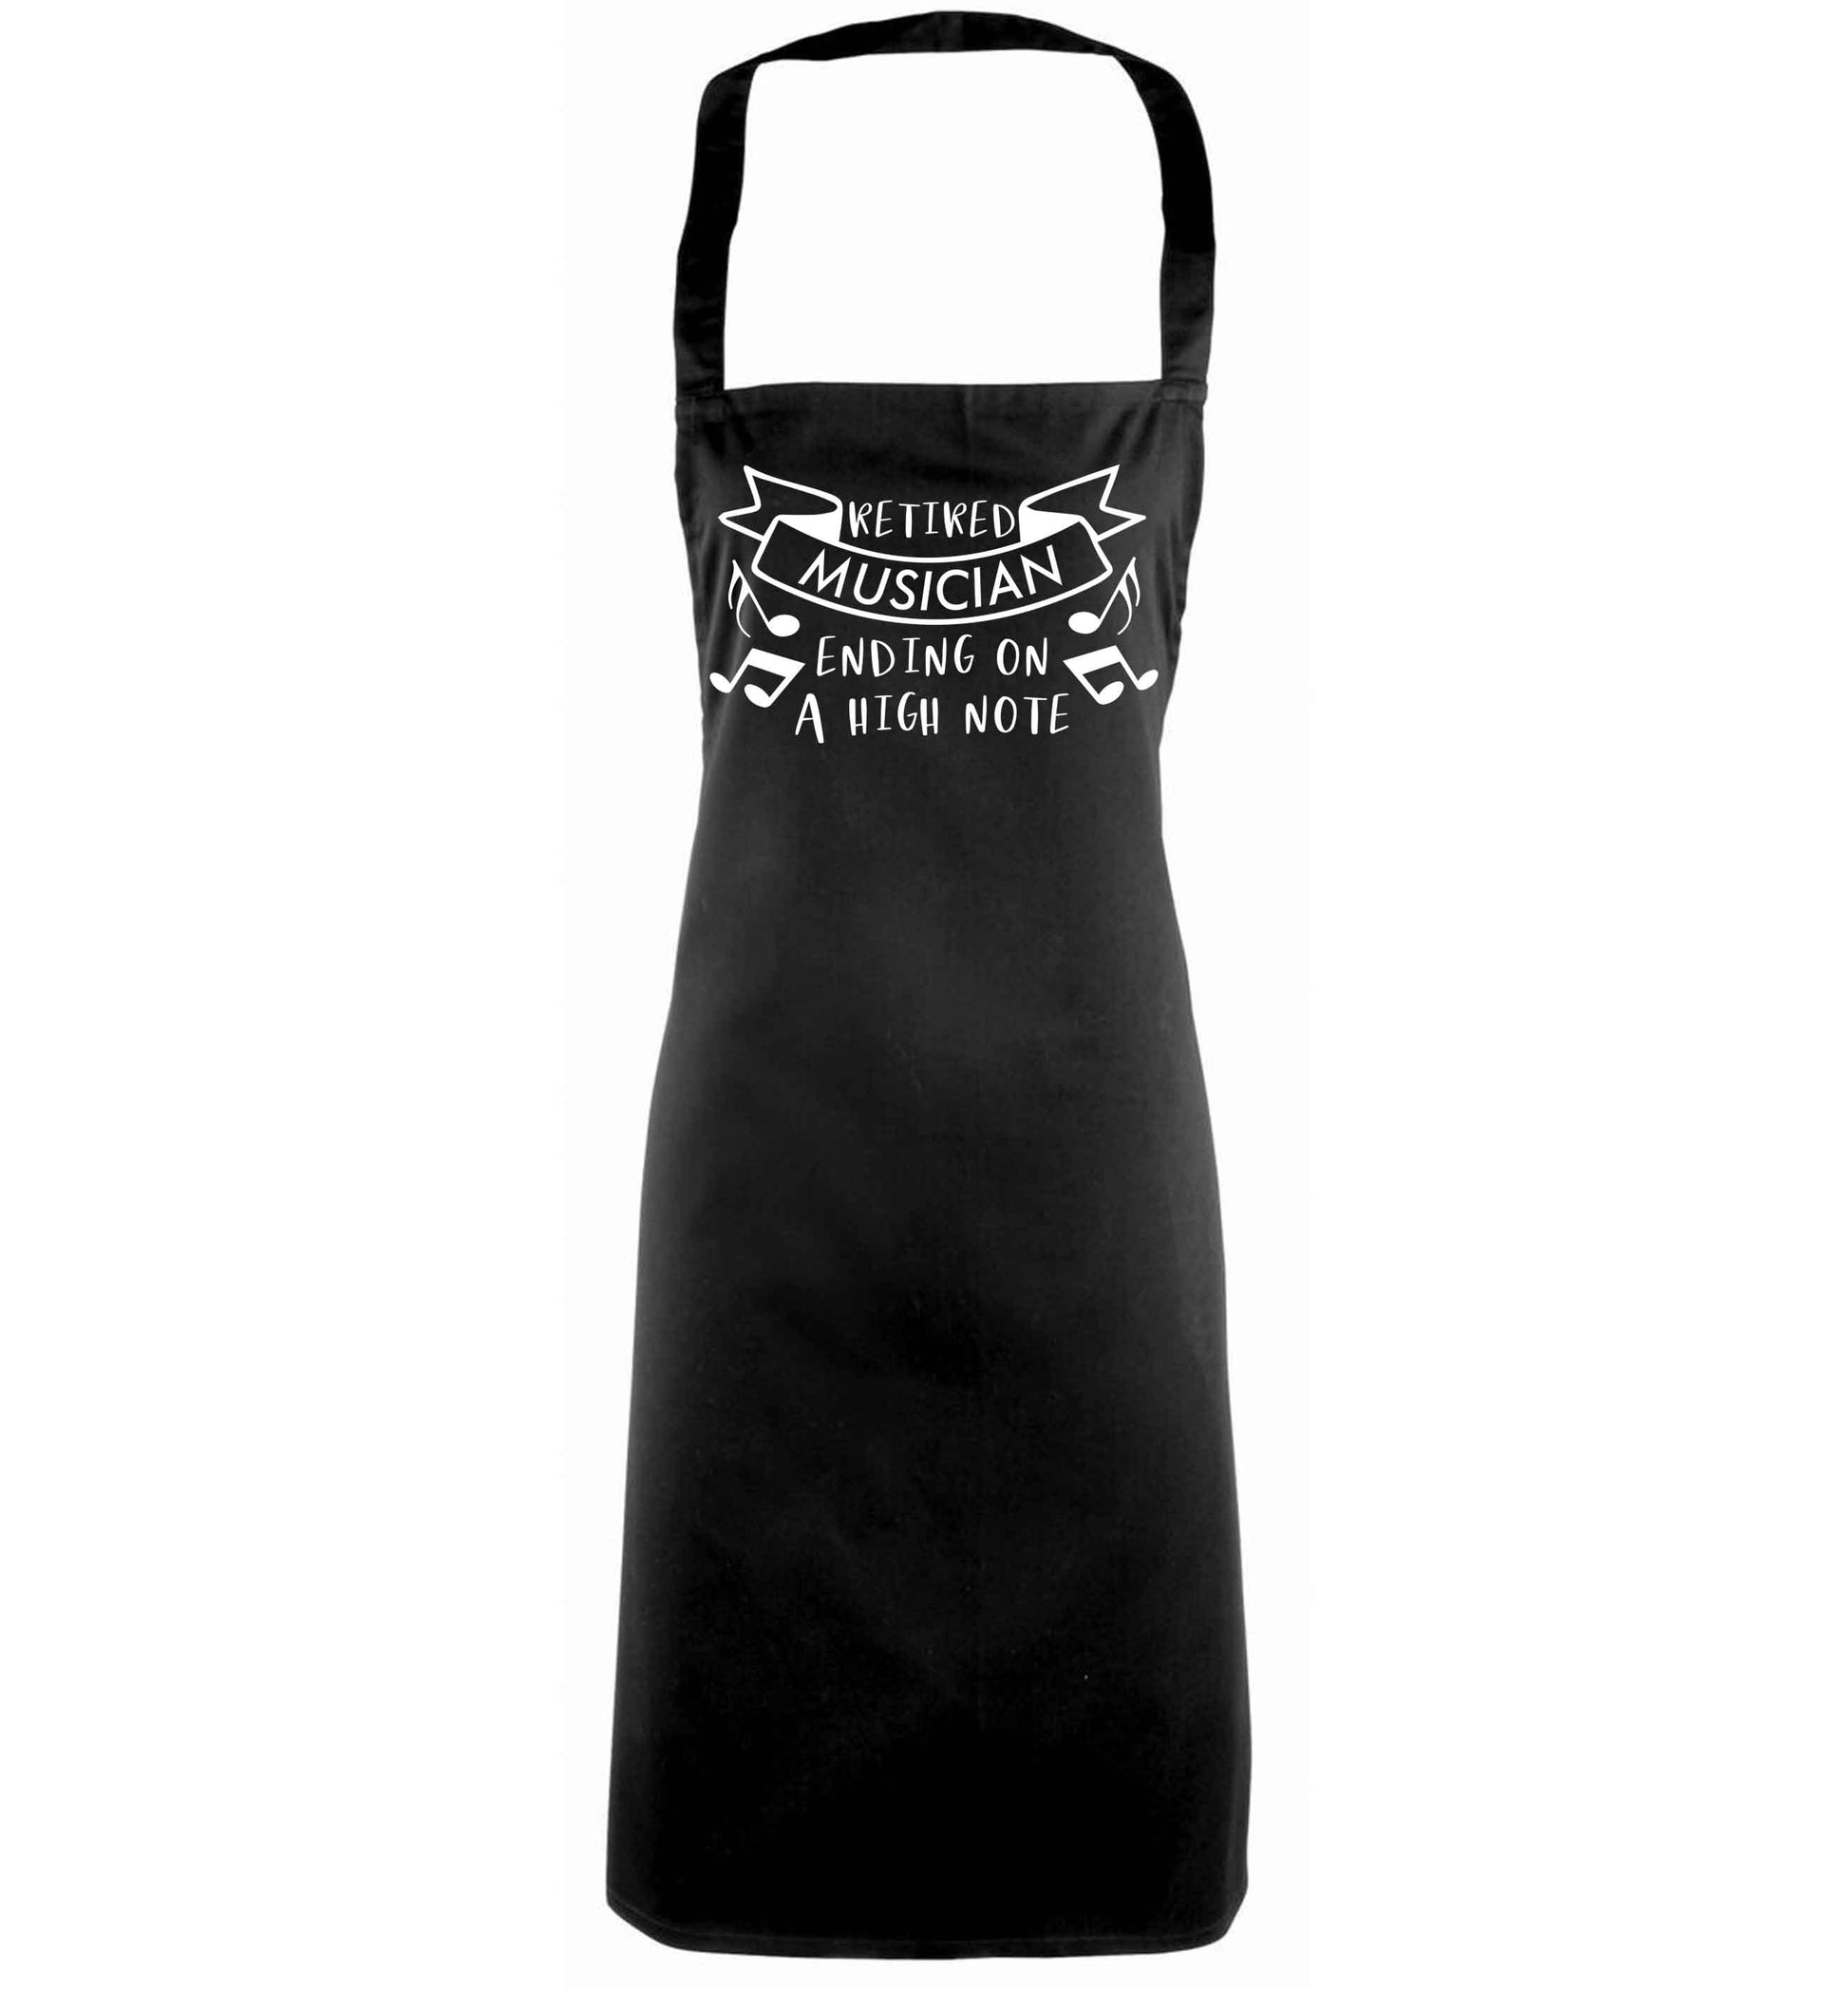 Retired musician ending on a high note black apron